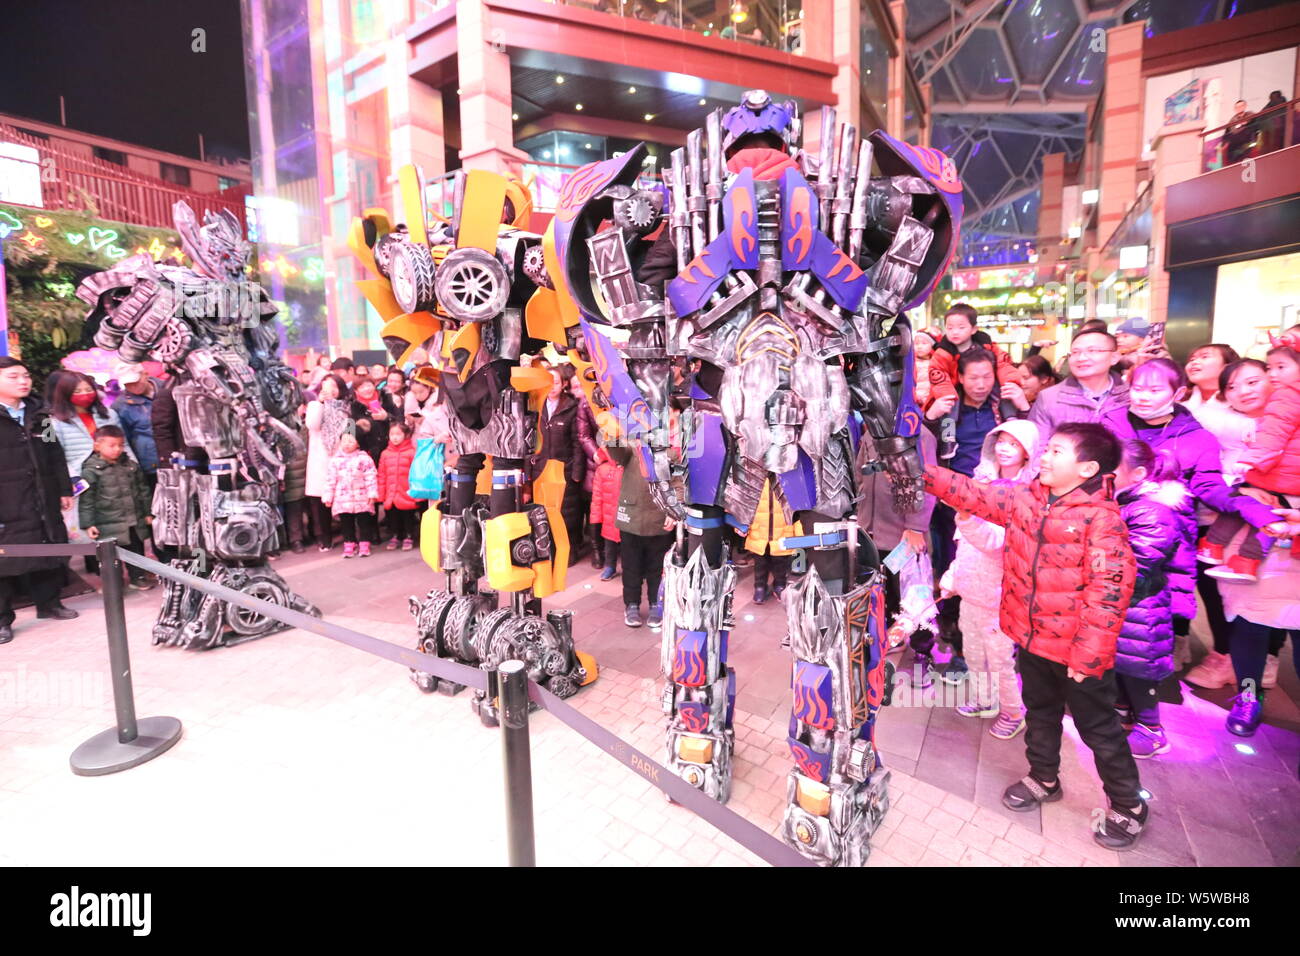 College students wearing two-meter-high life-size replicas of Megatron, Optimus Prime and Bumblebee are surrounded by customers at a shopping mall in Stock Photo